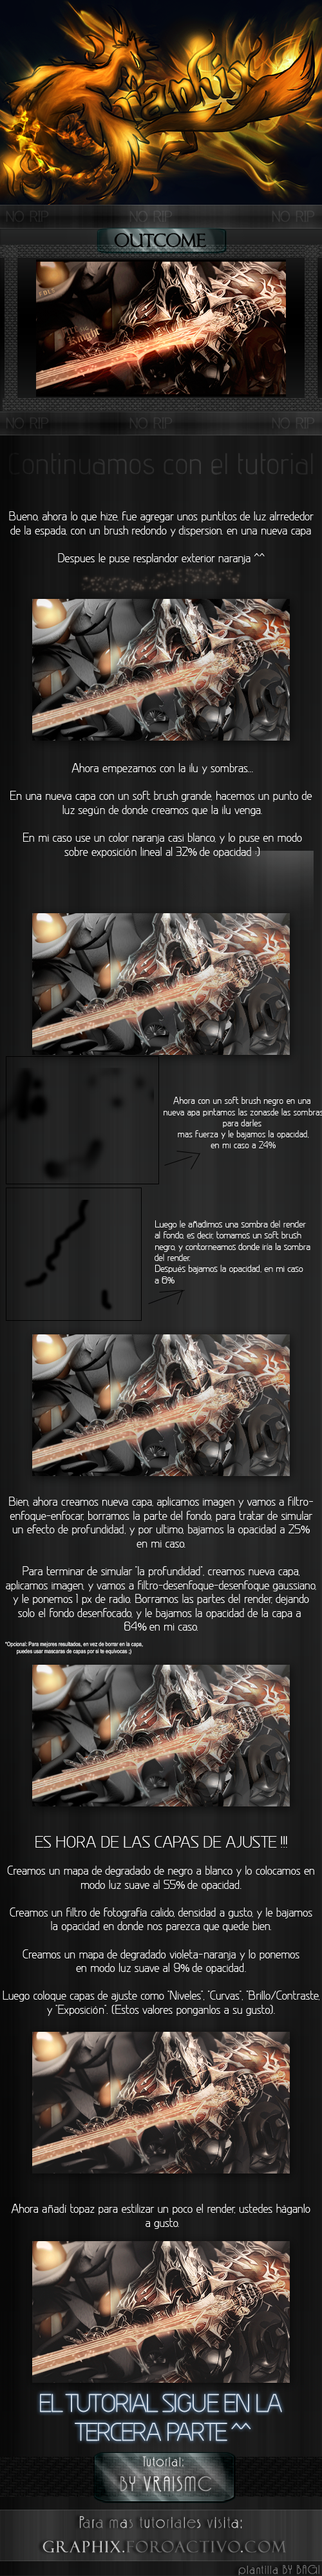 fire_knight_sig__tutorial_n_2_by_vraismc-d36gj38.png